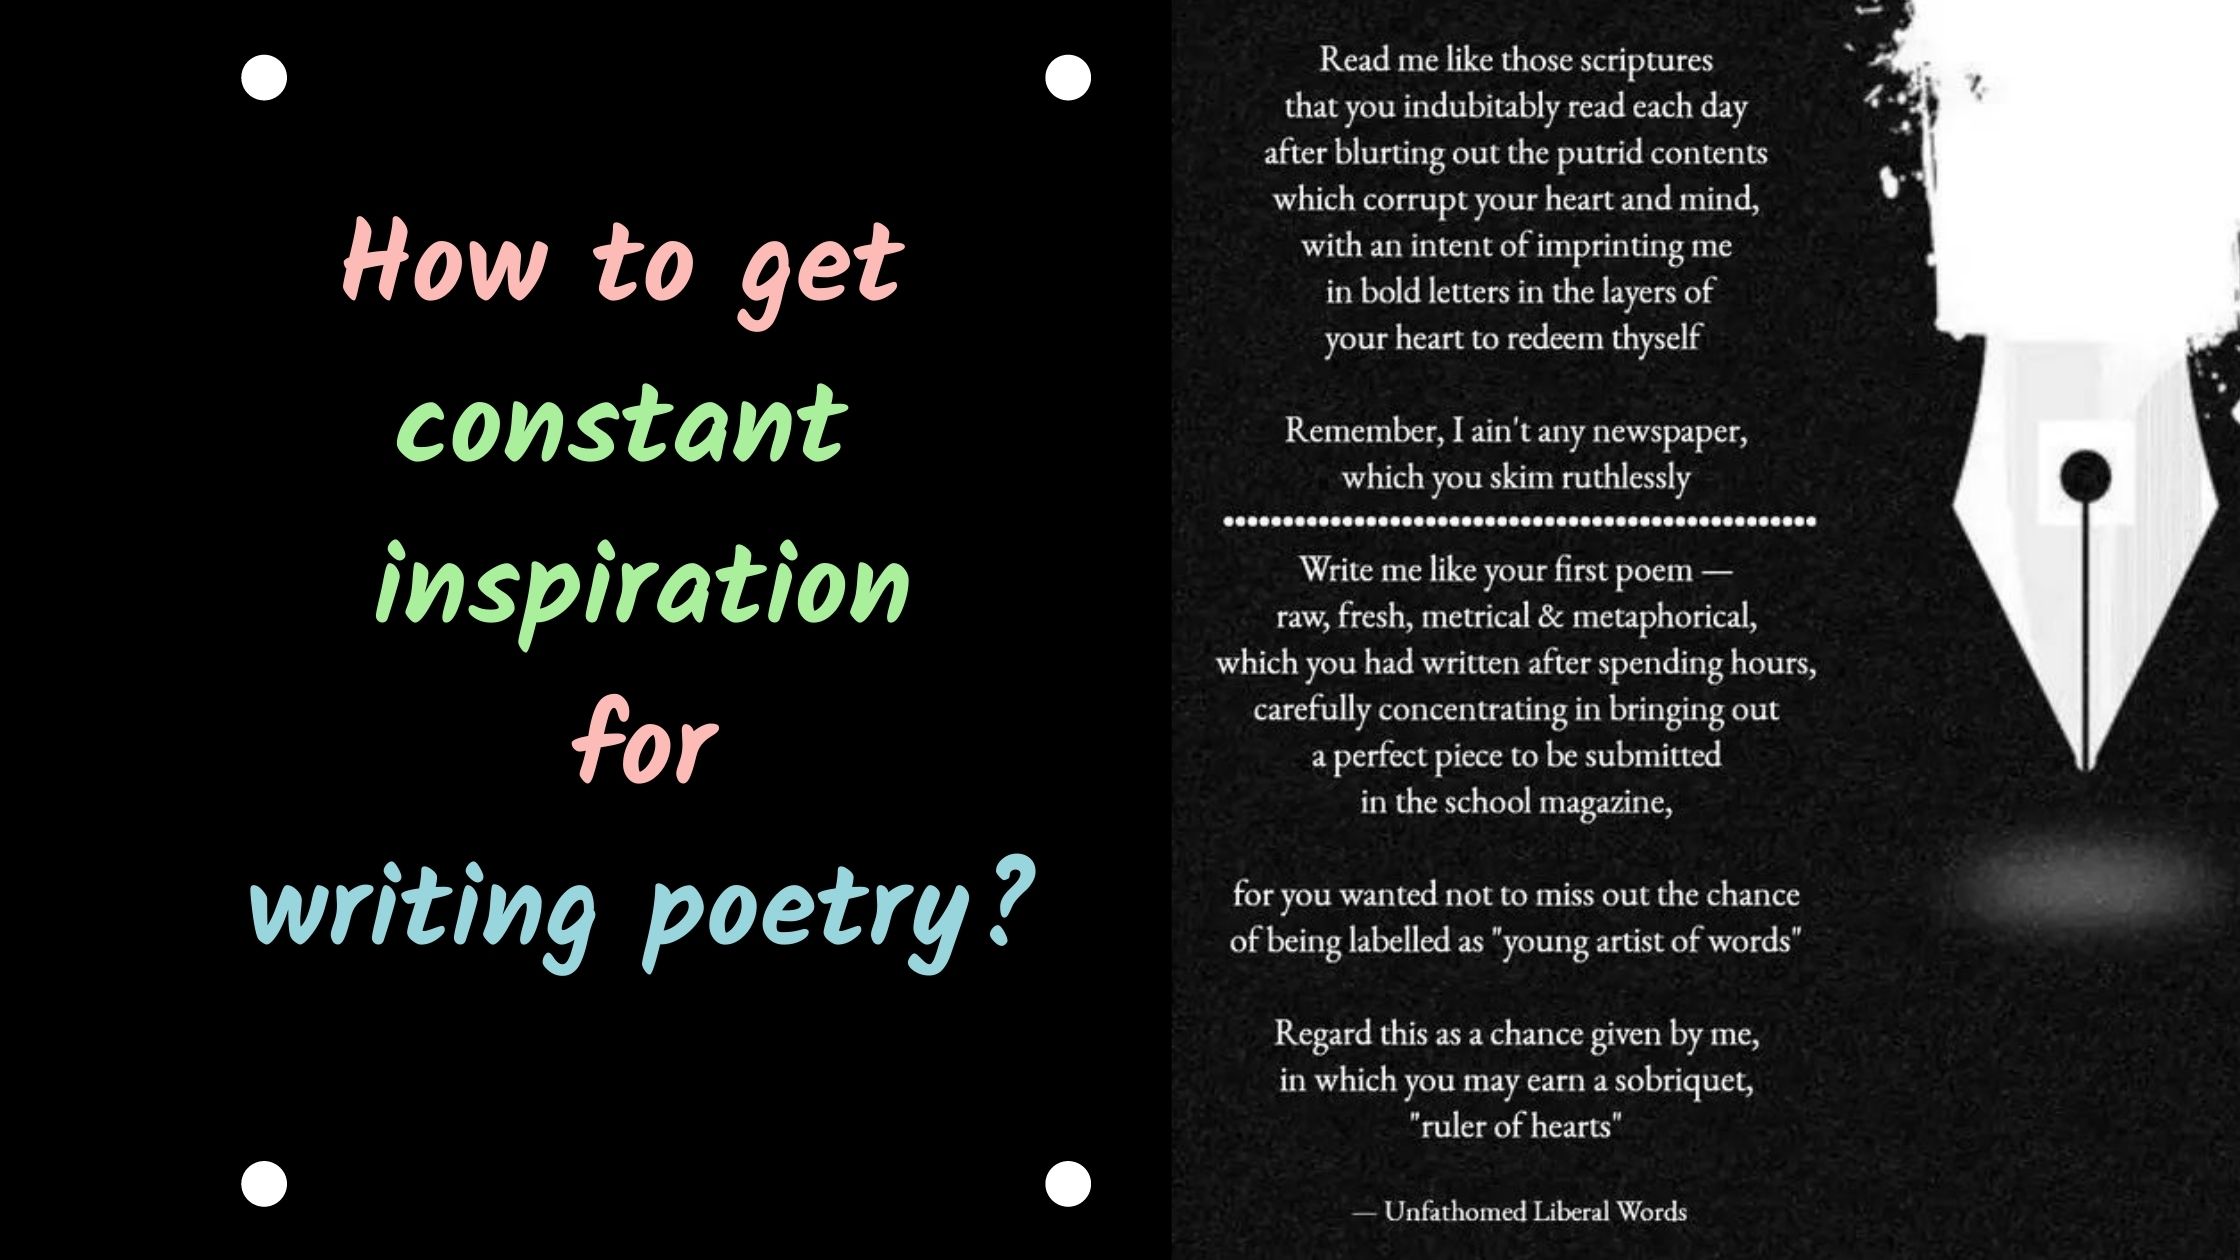 How to get constant inspiration for writing poetry?